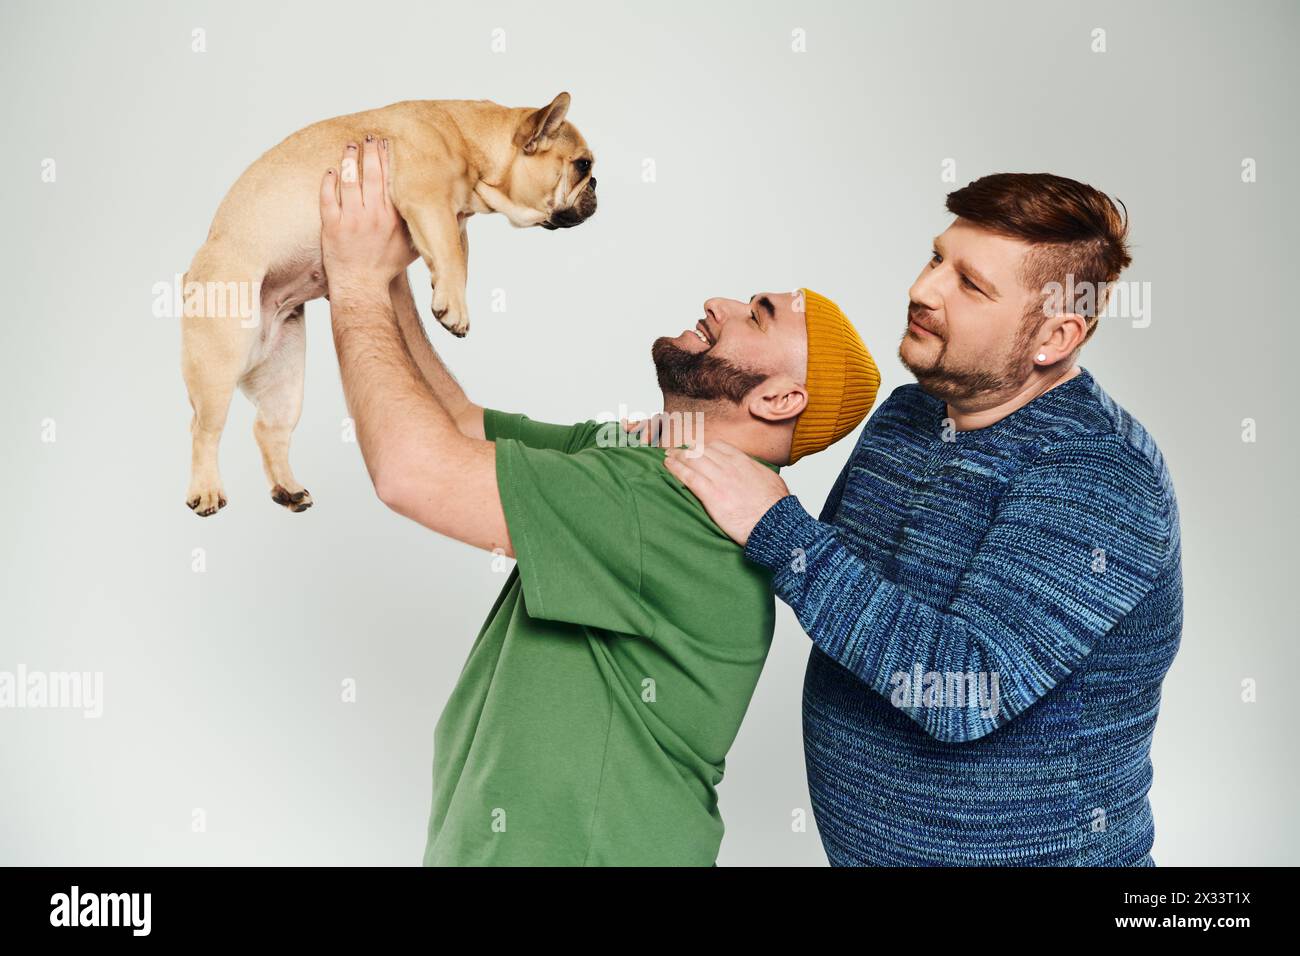 Two men delicately holds a French Bulldog up close to his face in a tender moment. Stock Photo